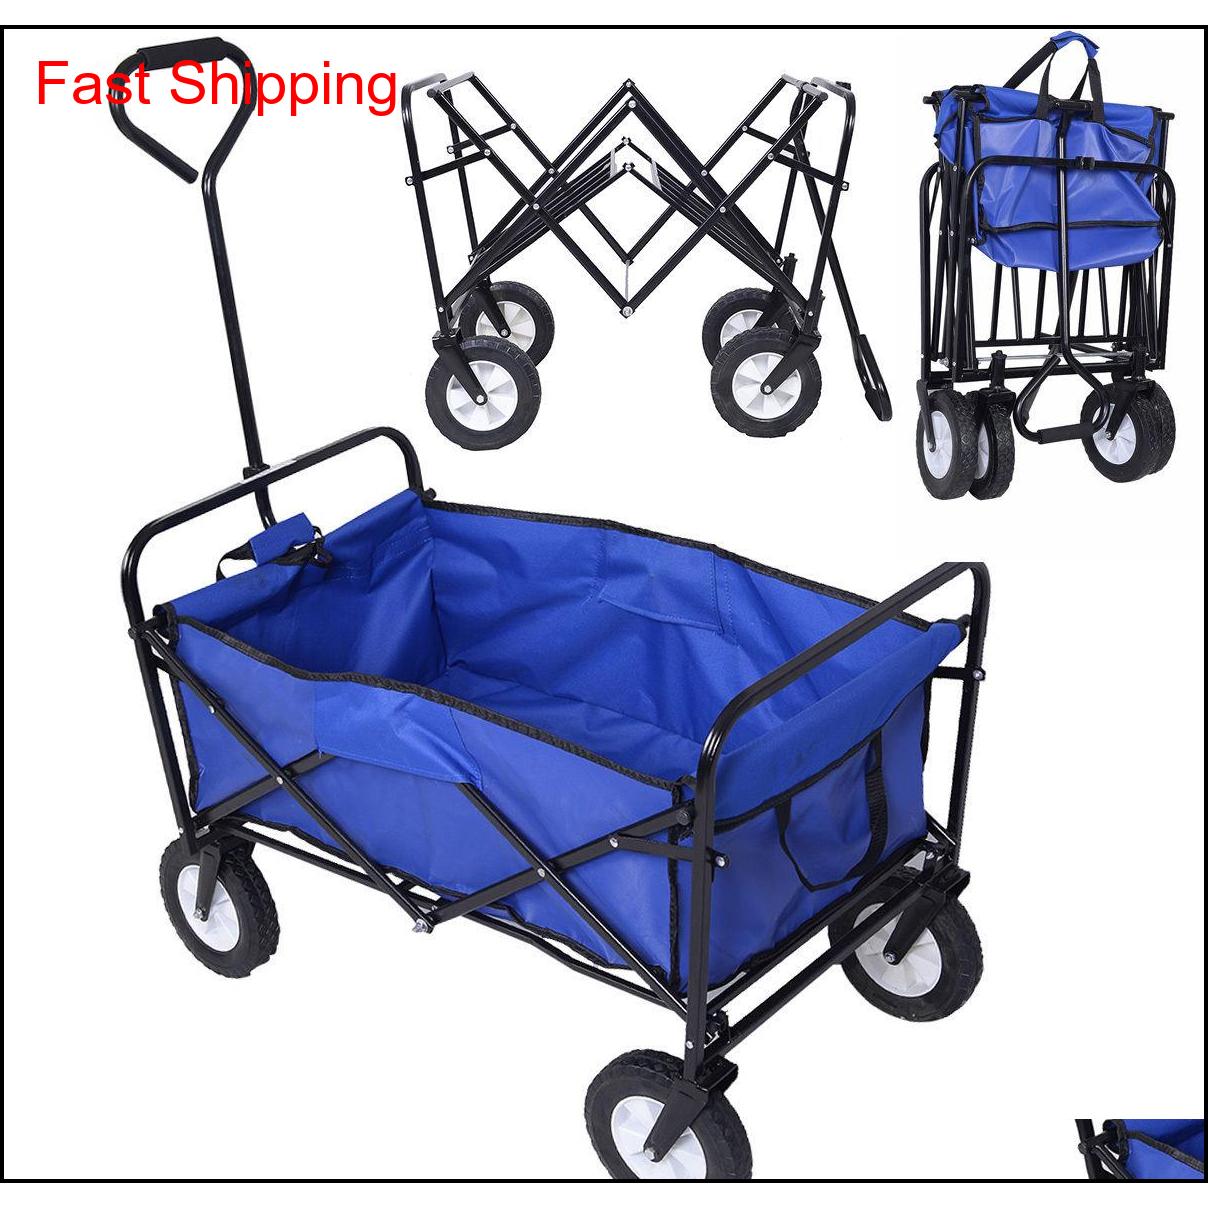 

Other Supplies Patio Lawn Home Drop Delivery 2021 Collapsible Folding Wagon Cart Garden By Shopping Beach Toy Sports Blue Yoz4Y